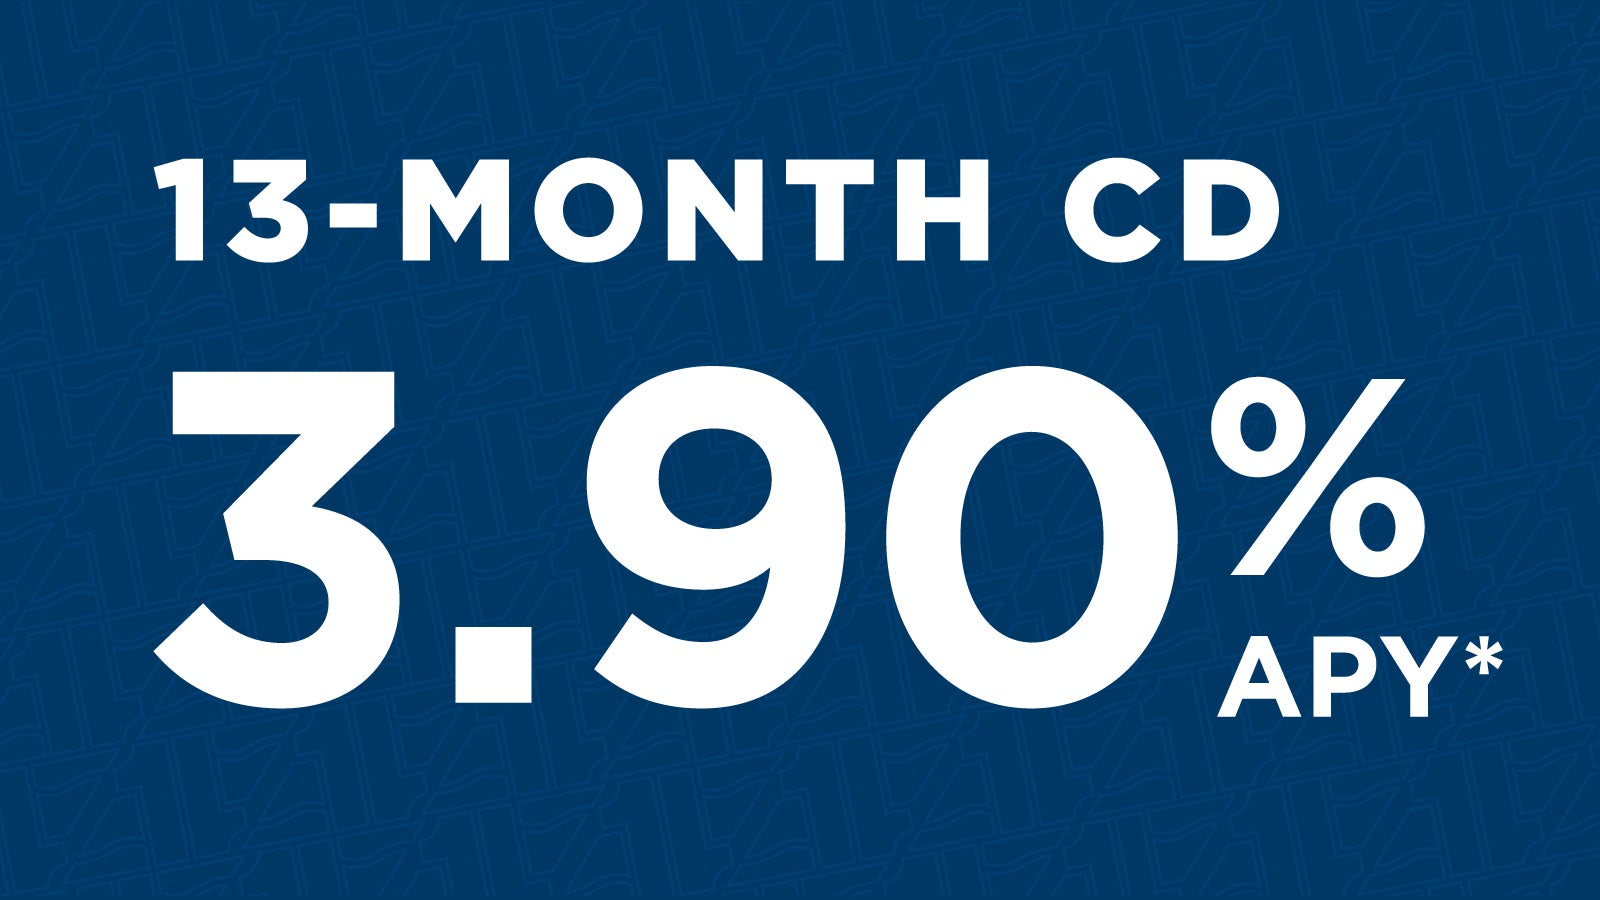 Special CD Rate | 3.90% APY for 13 months